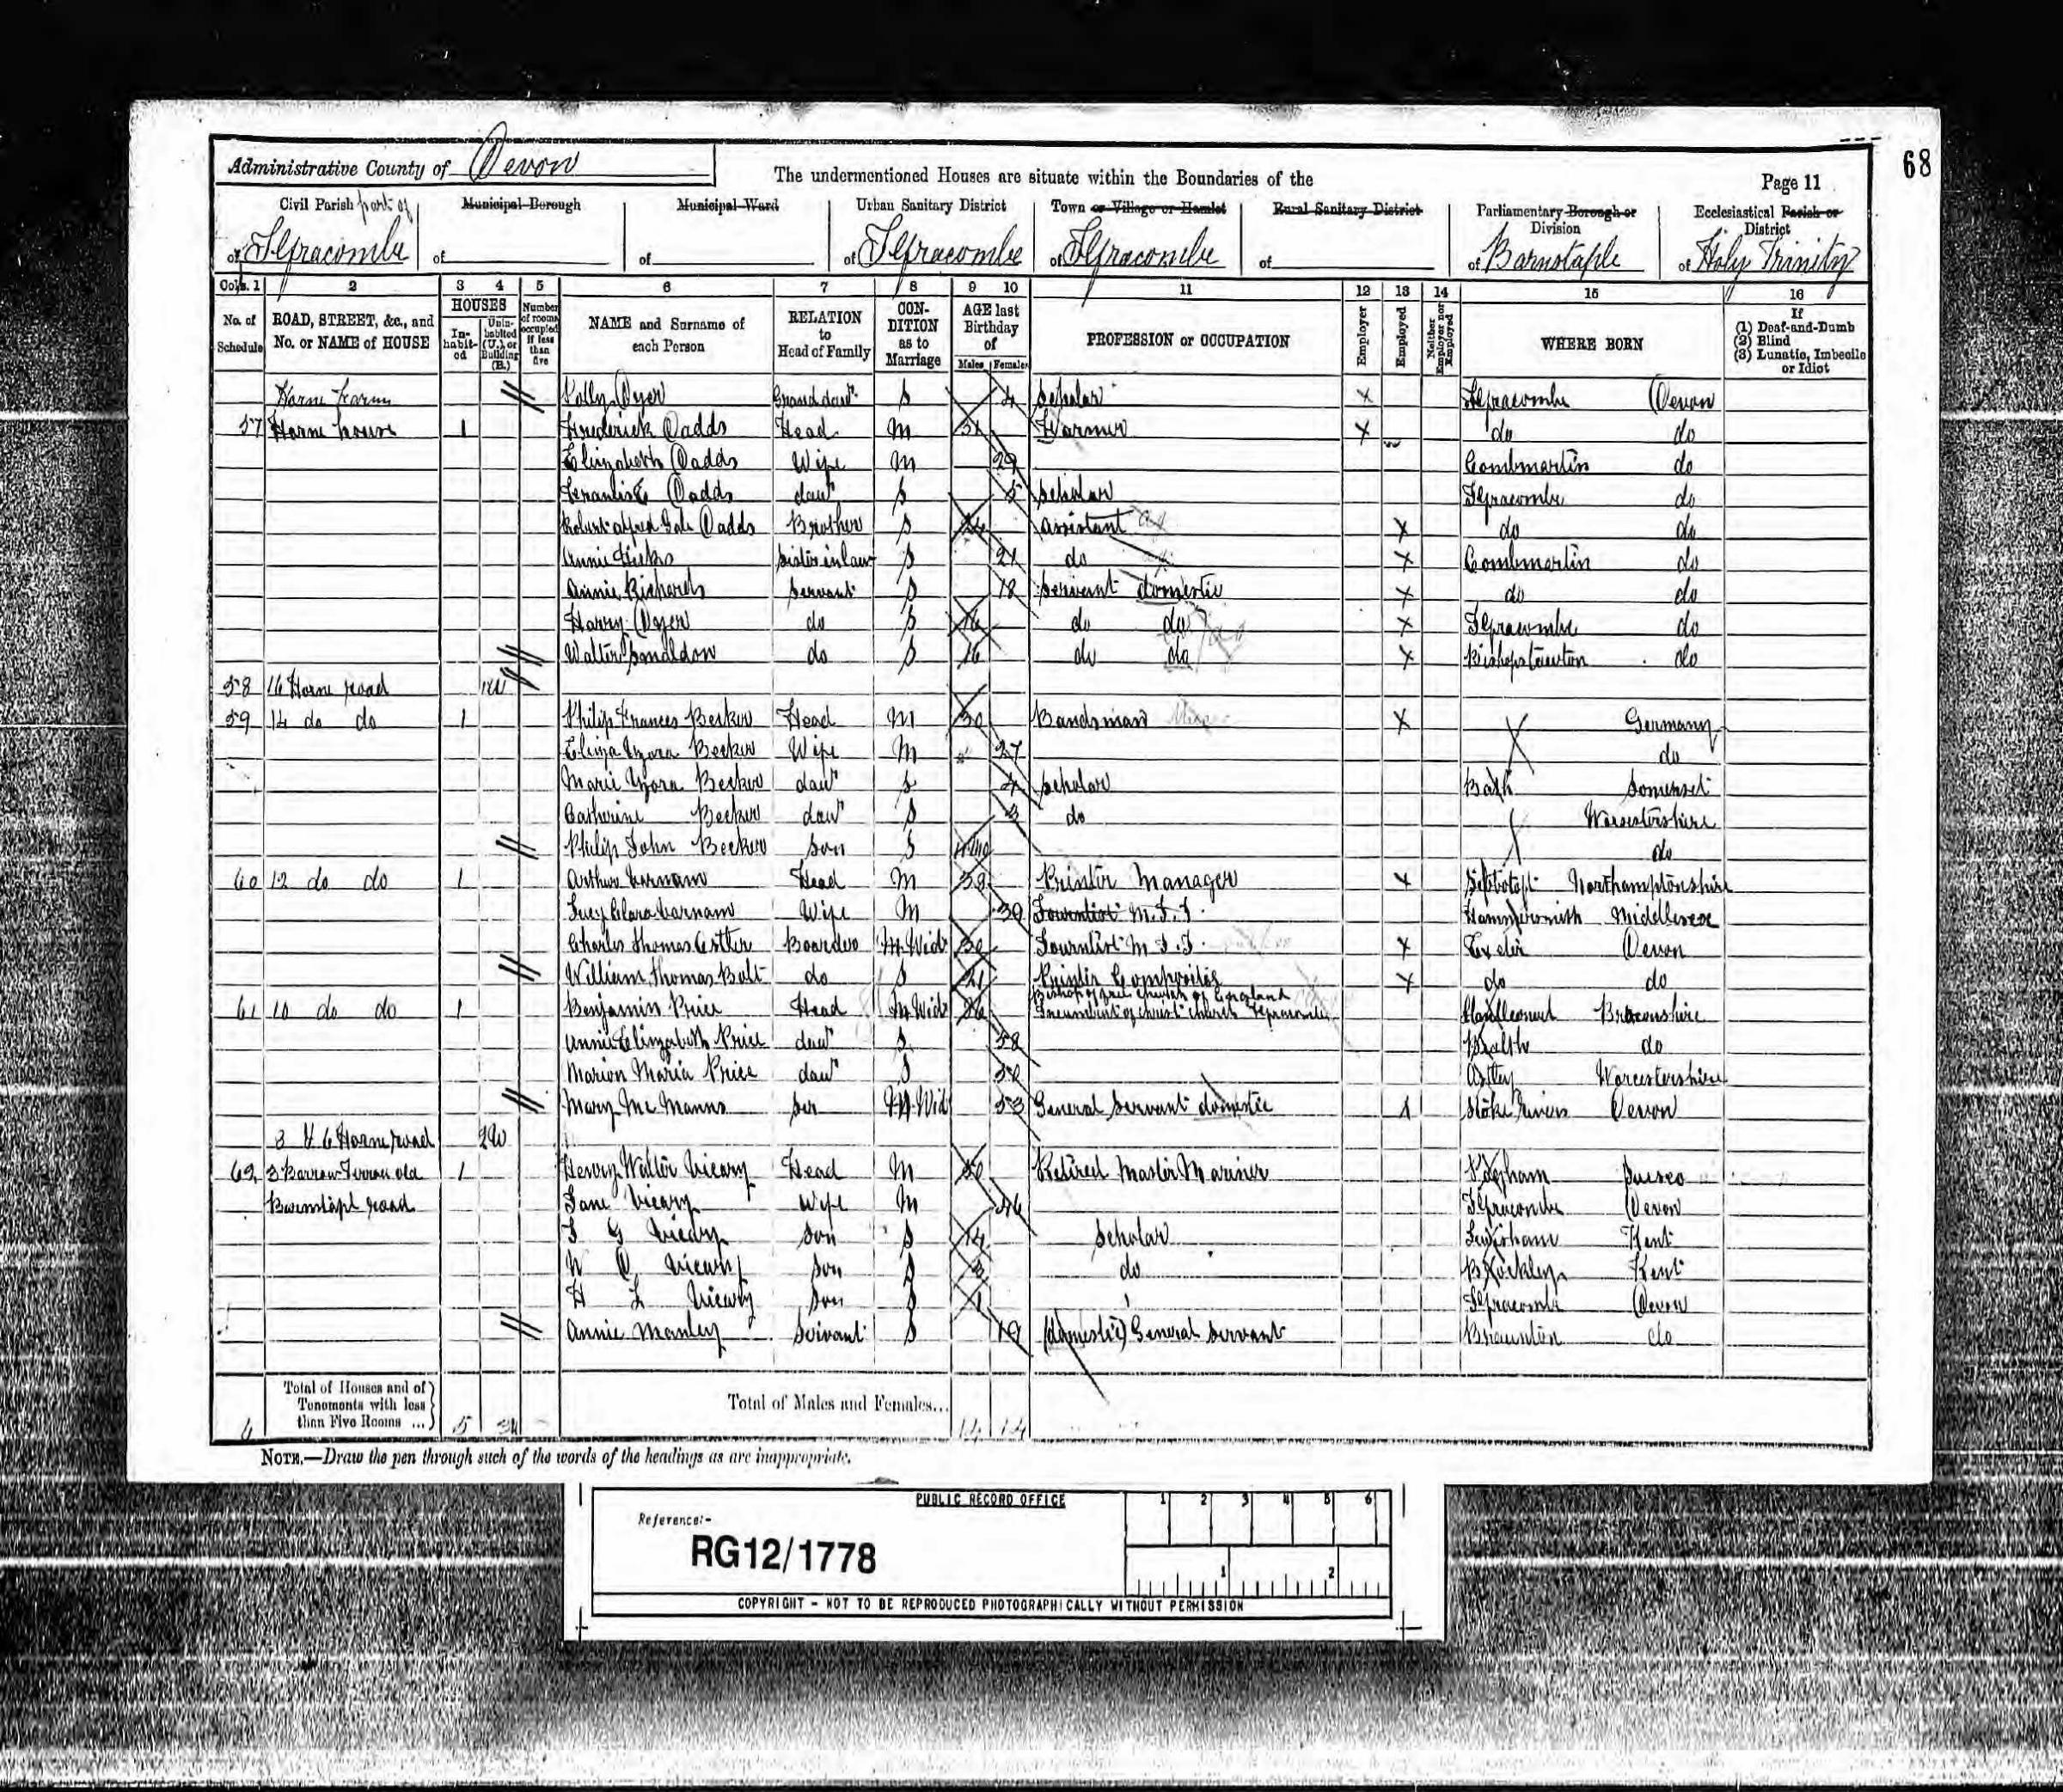 The Becker family in the 1891 census